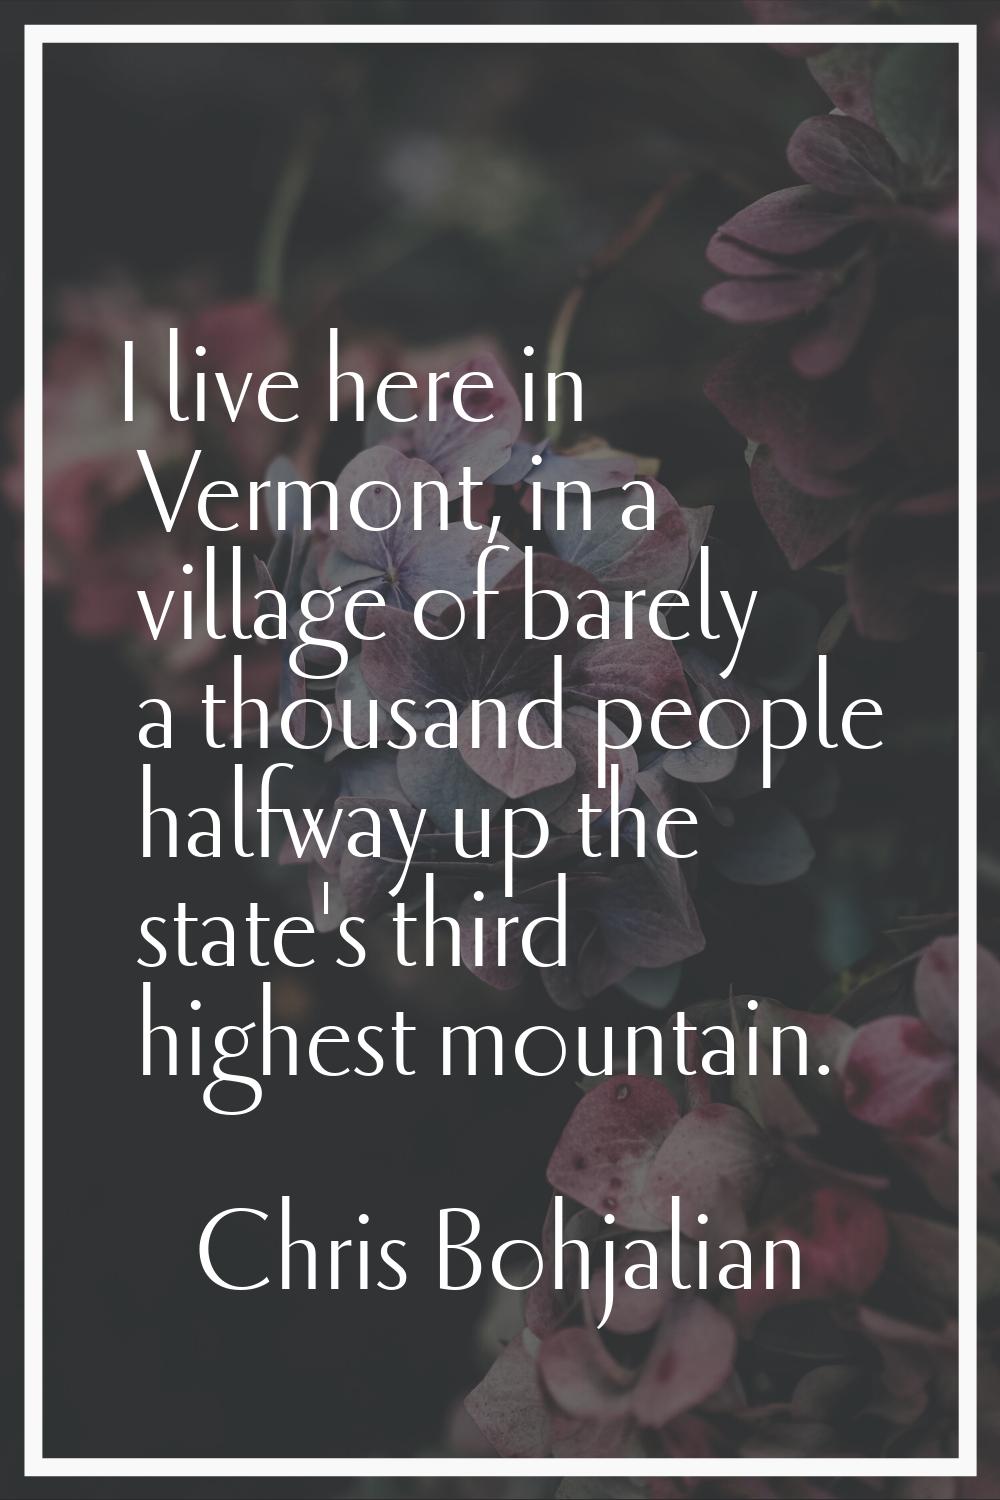 I live here in Vermont, in a village of barely a thousand people halfway up the state's third highe